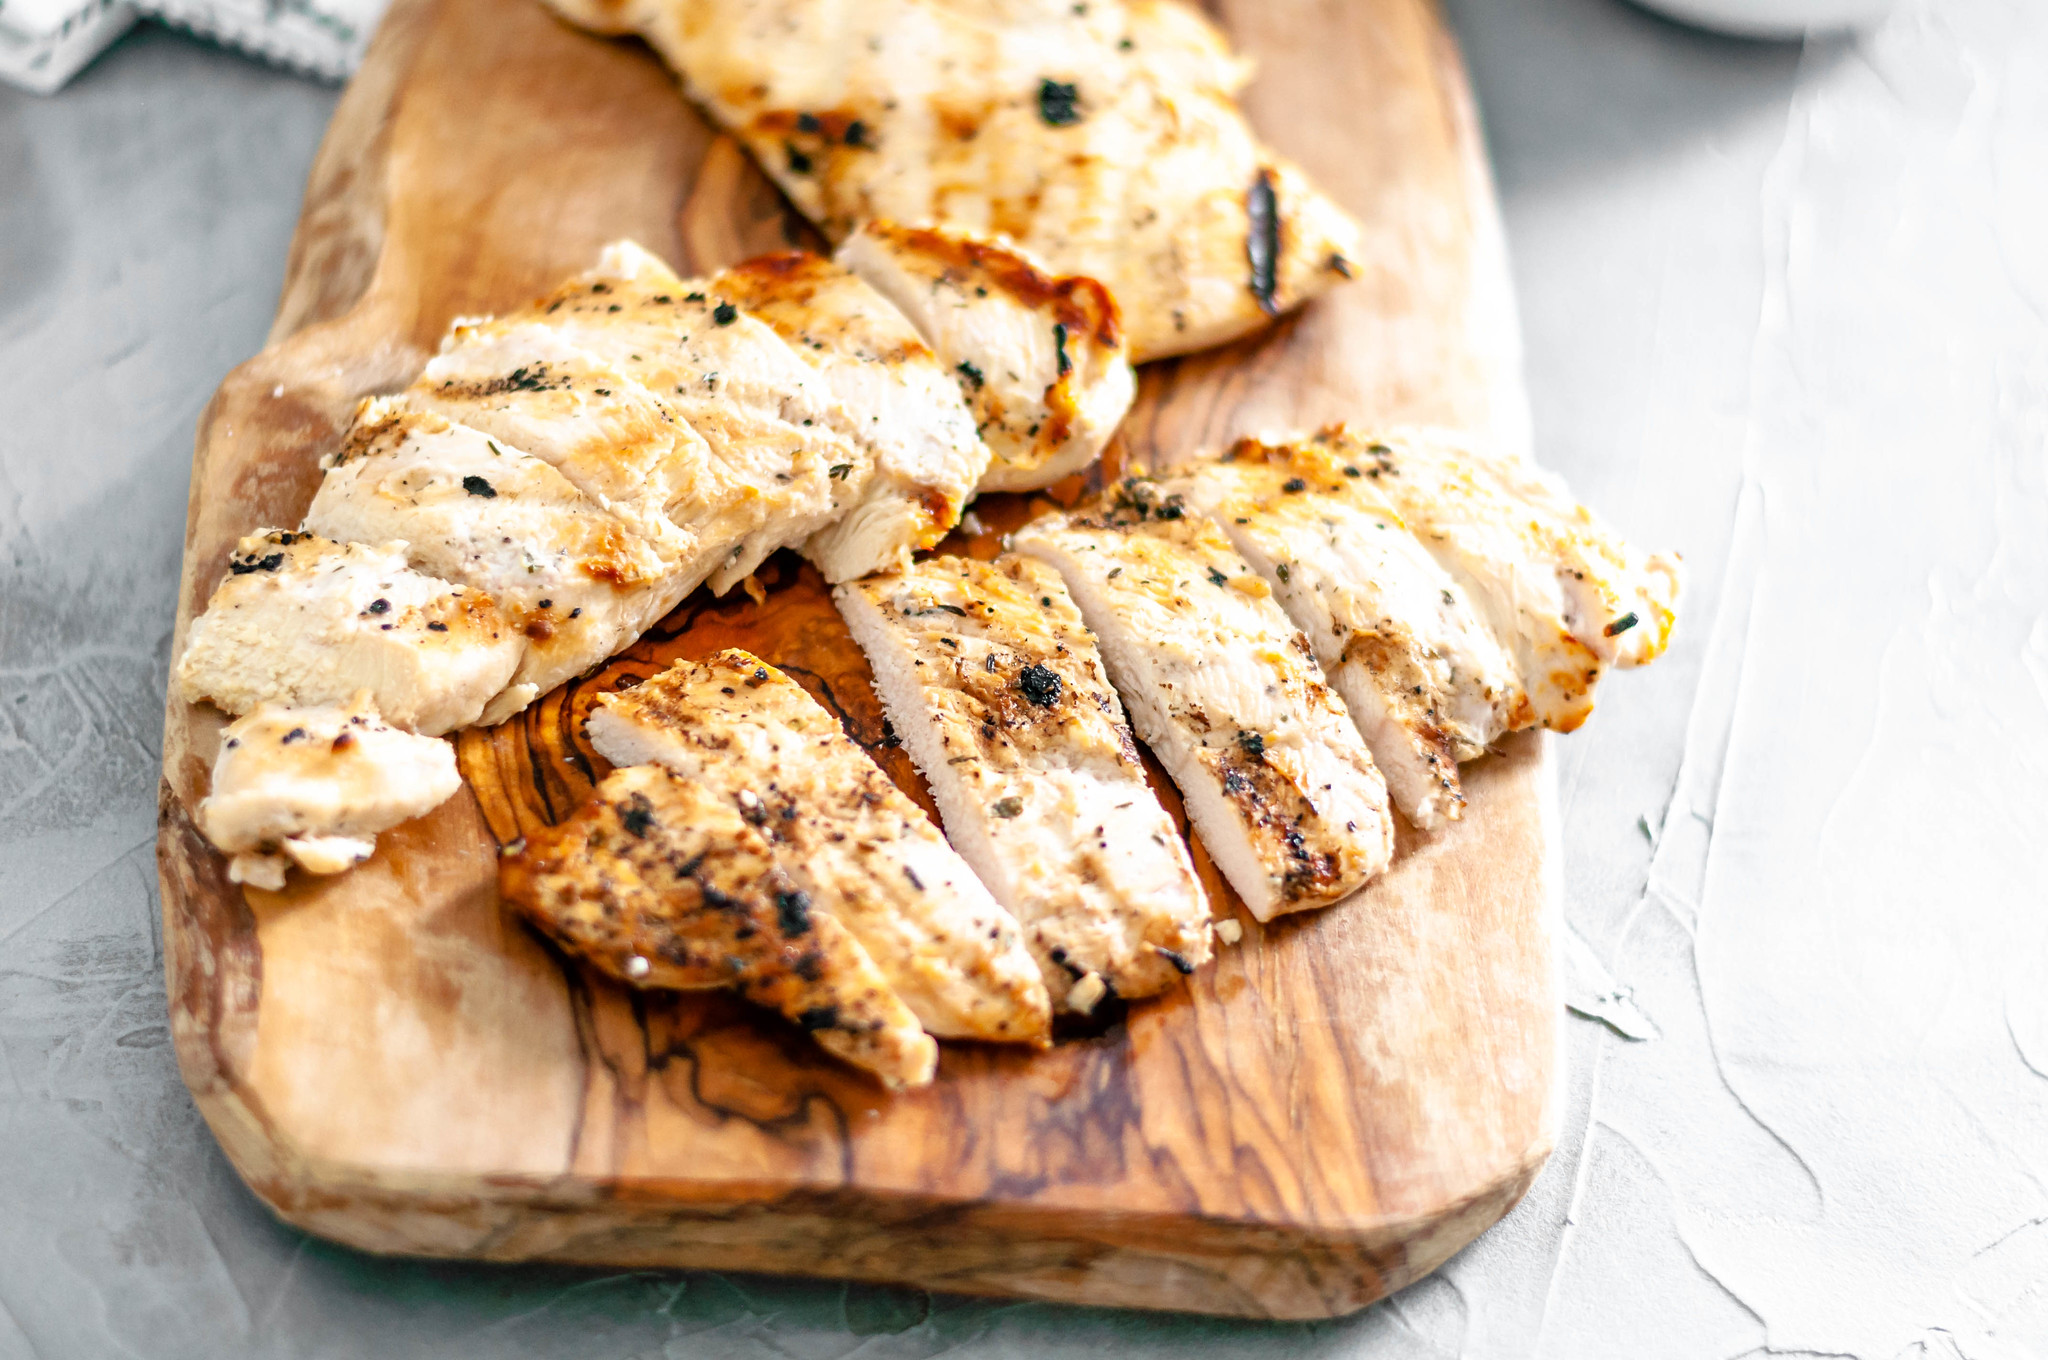 Grilled Buttermilk Chicken is super easy to prepare with a handful of ingredients. Simple grilled chicken, tender from the buttermilk marinade. Great on its own or atop a salad.